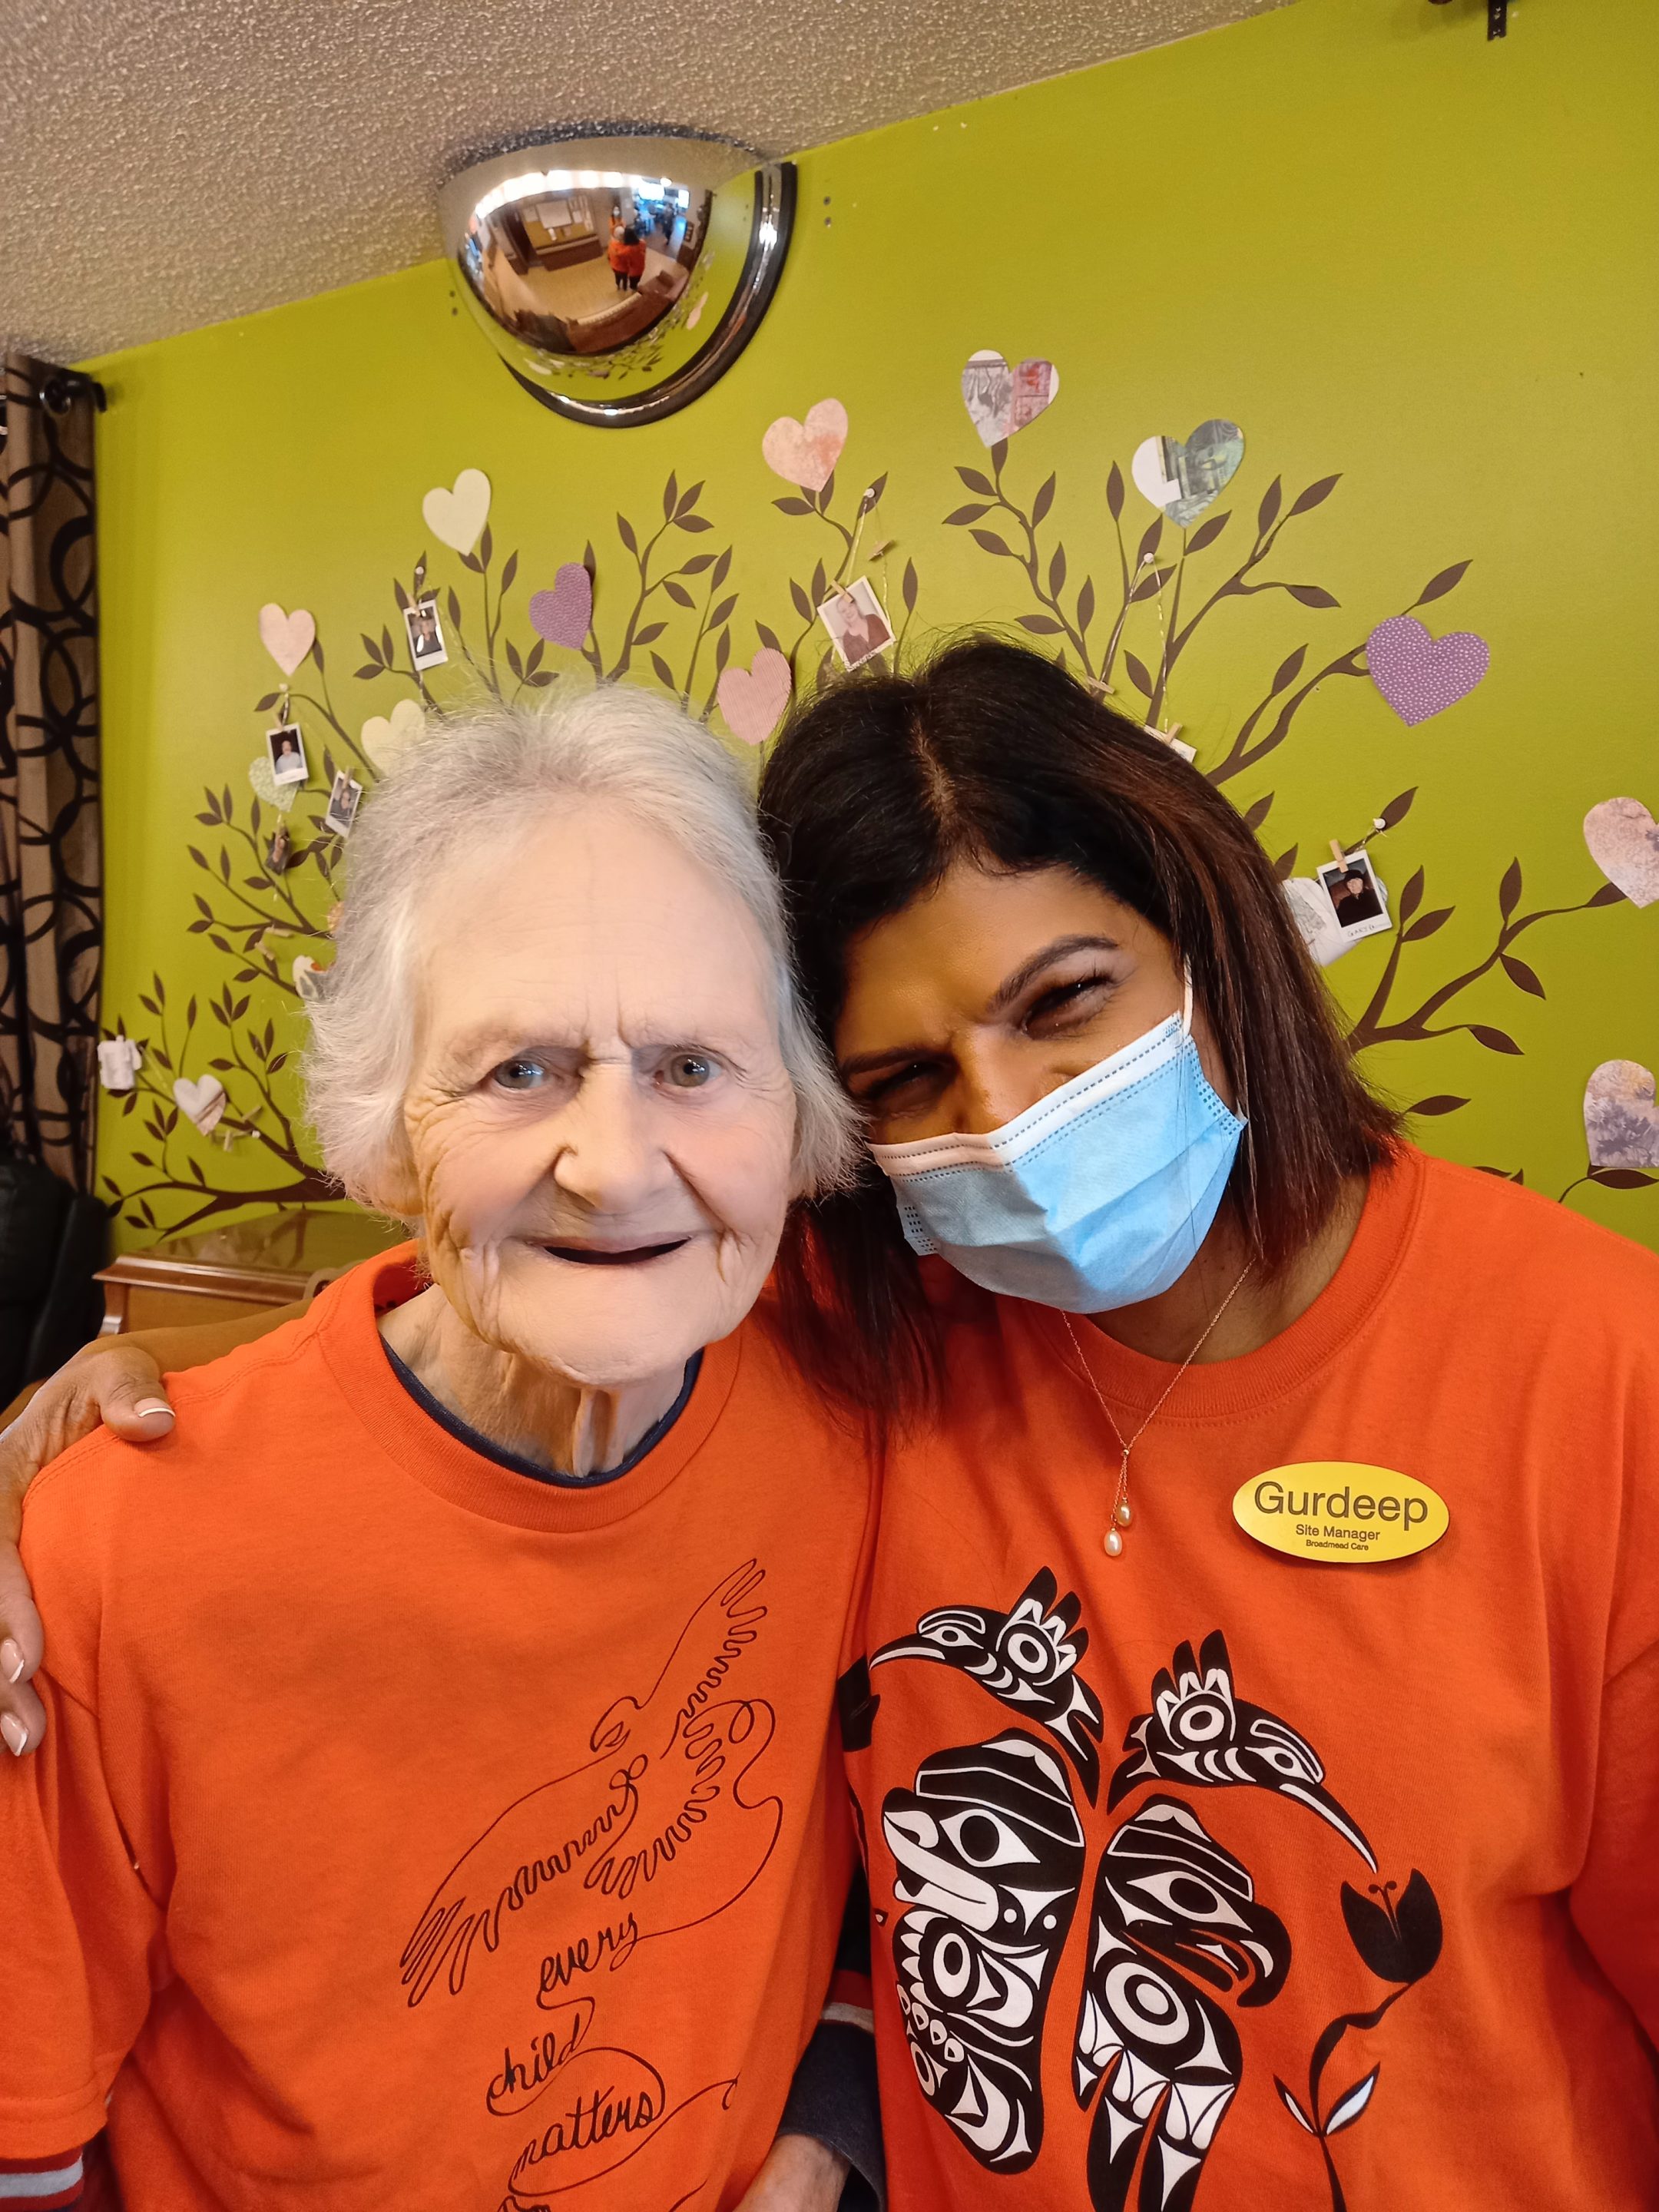 Orange Shirt Day at Broadmead Care at Rest Haven Lodge in Sidney. Care Manager Gurdeep (right) and a resident (left) are both wearing orange shirts.